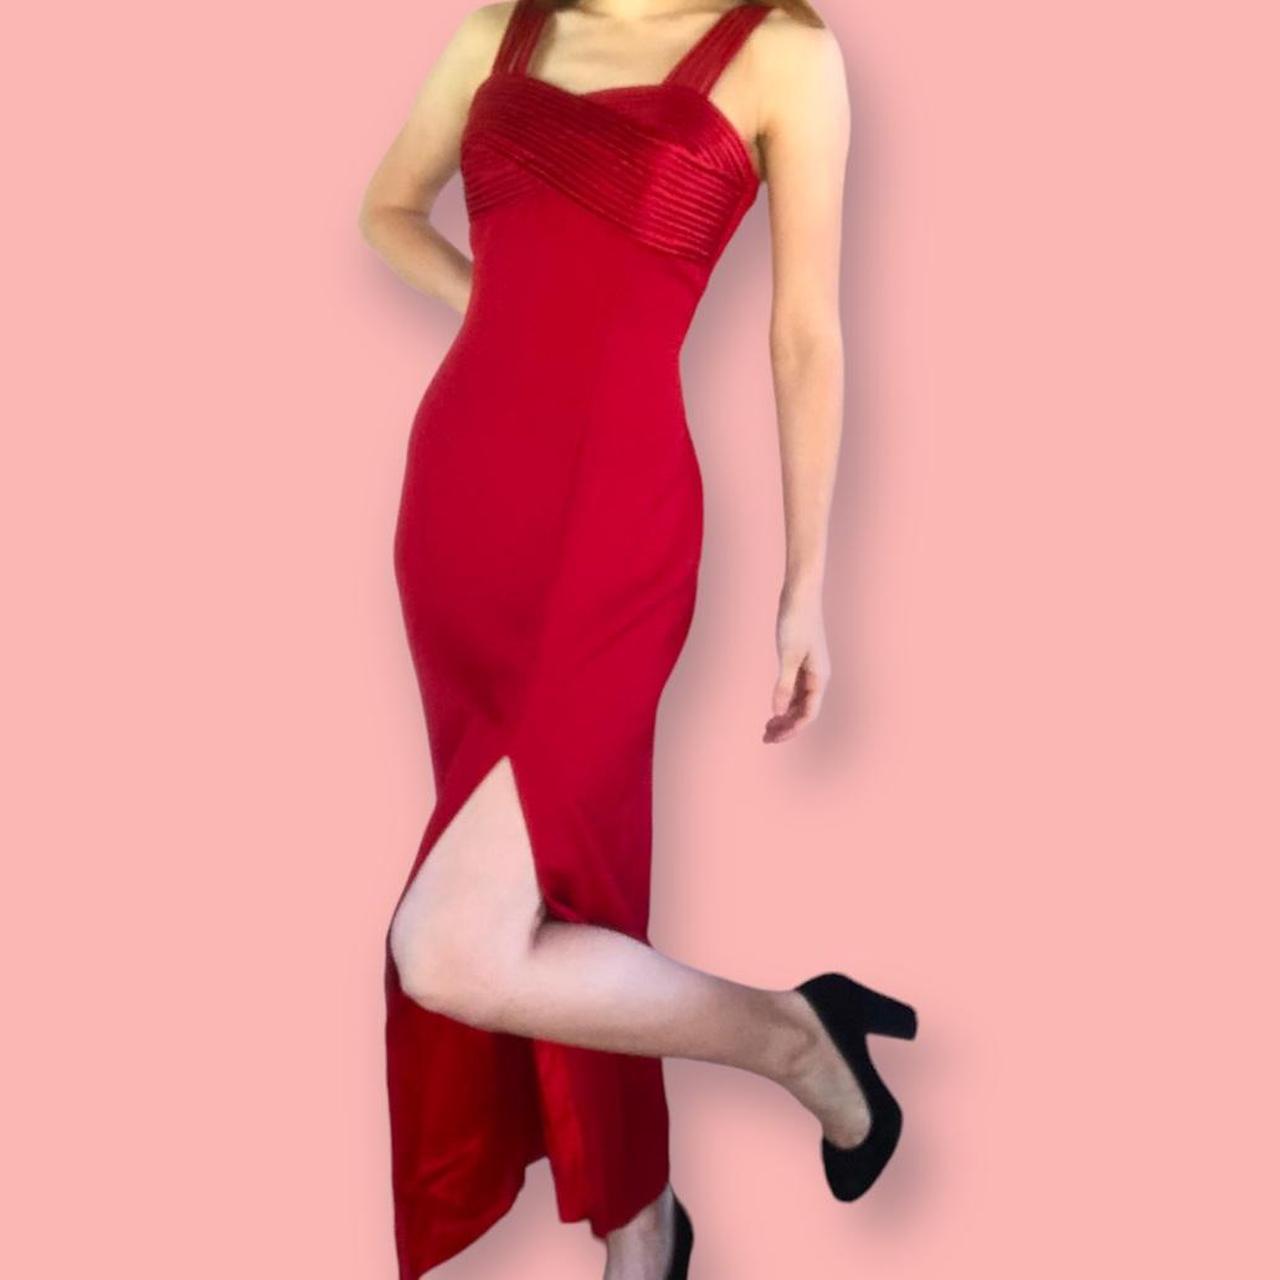 Stunning Red Bodycon Gown